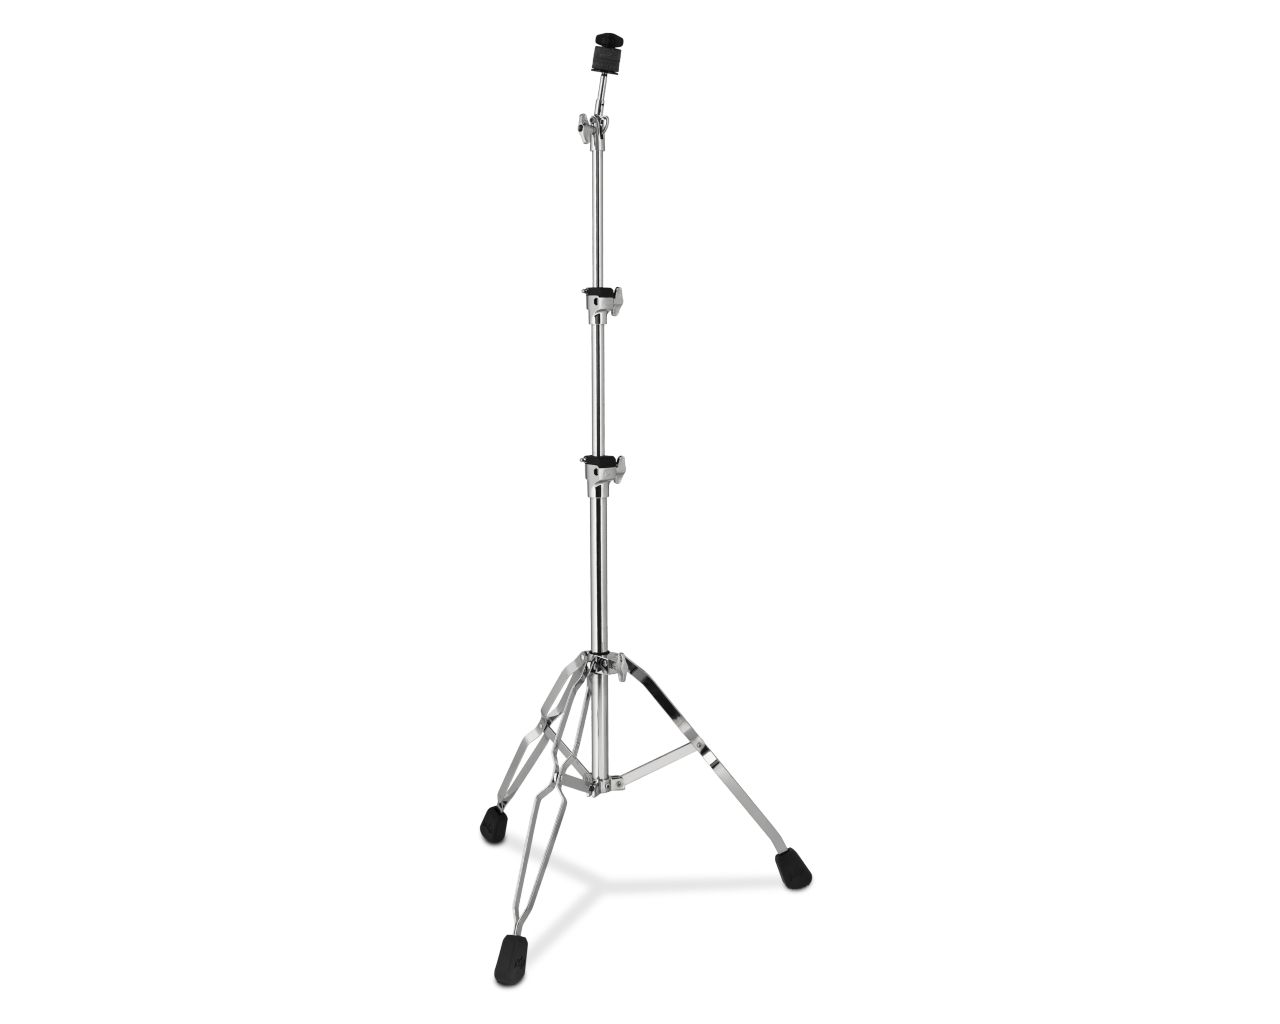 PDP BY DW 800 SERIES CYMBAL STANDS PDCS810 